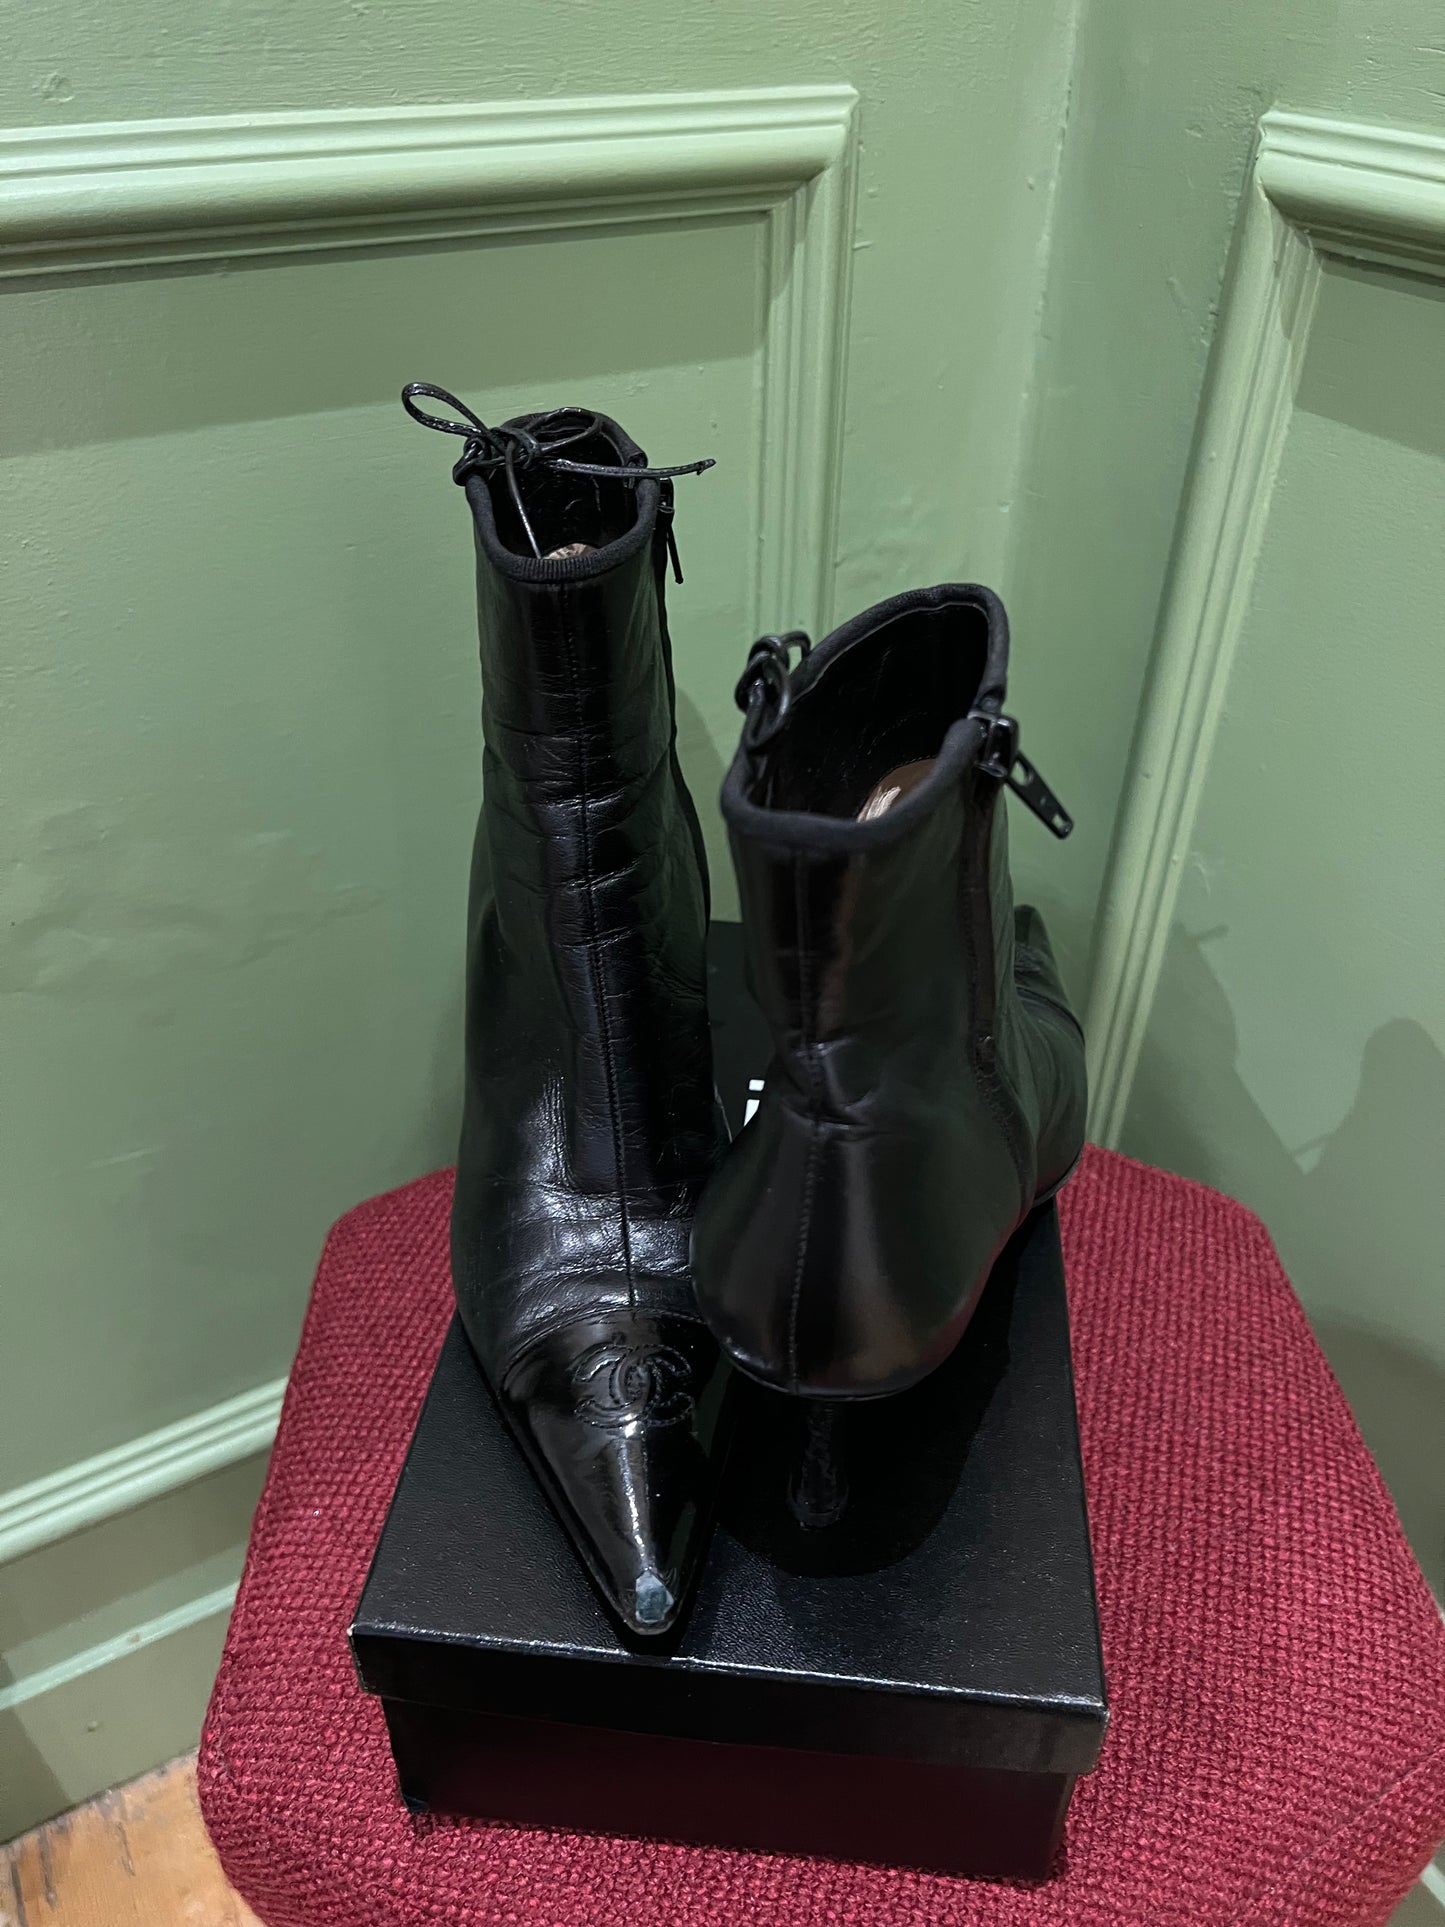 Chanel Vintage Ankle High-Heel Boots